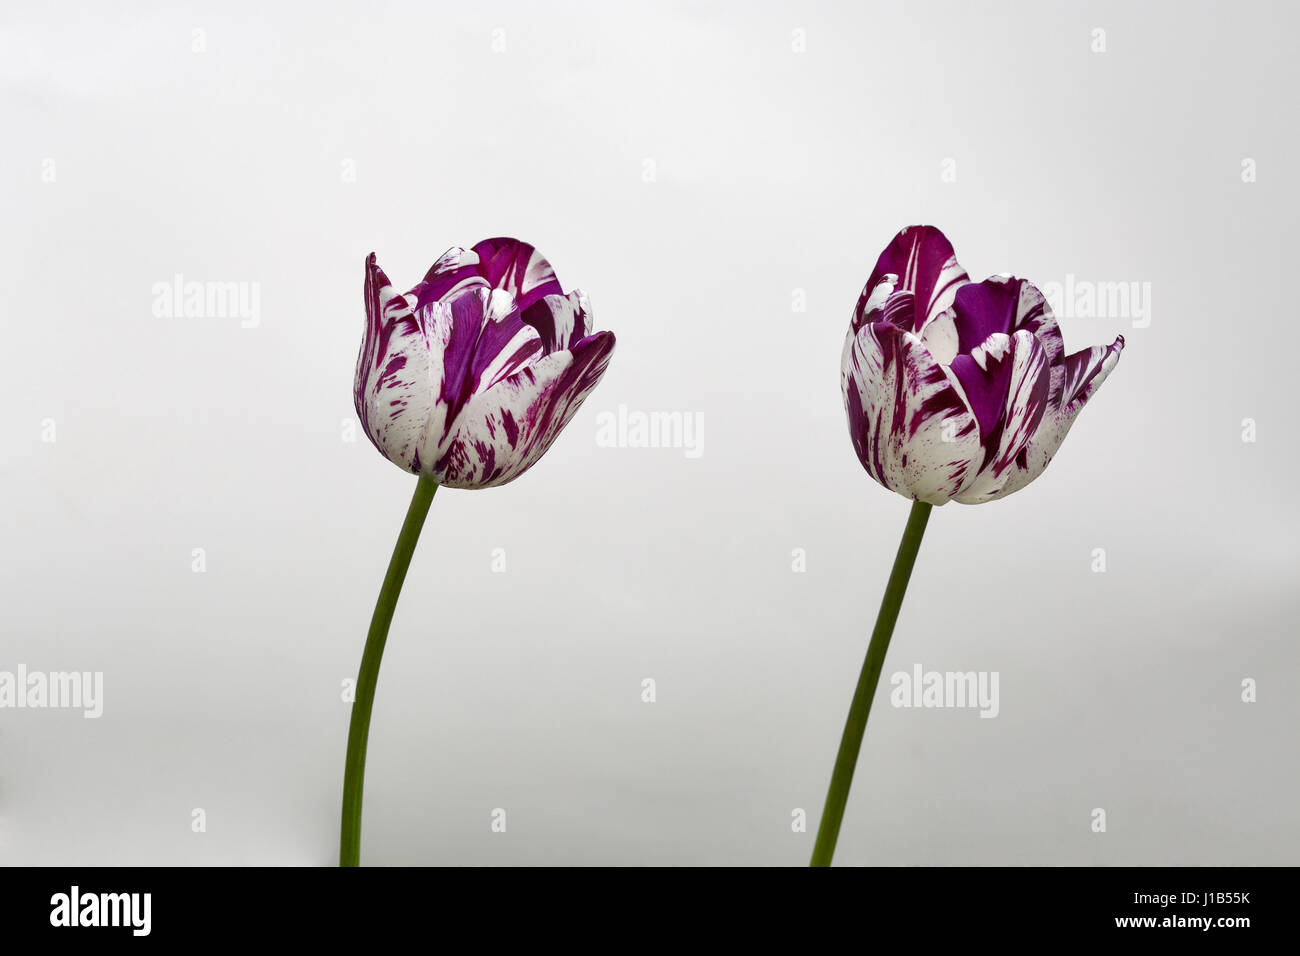 Two beautiful stripped violet white tulips closeup against white background Stock Photo